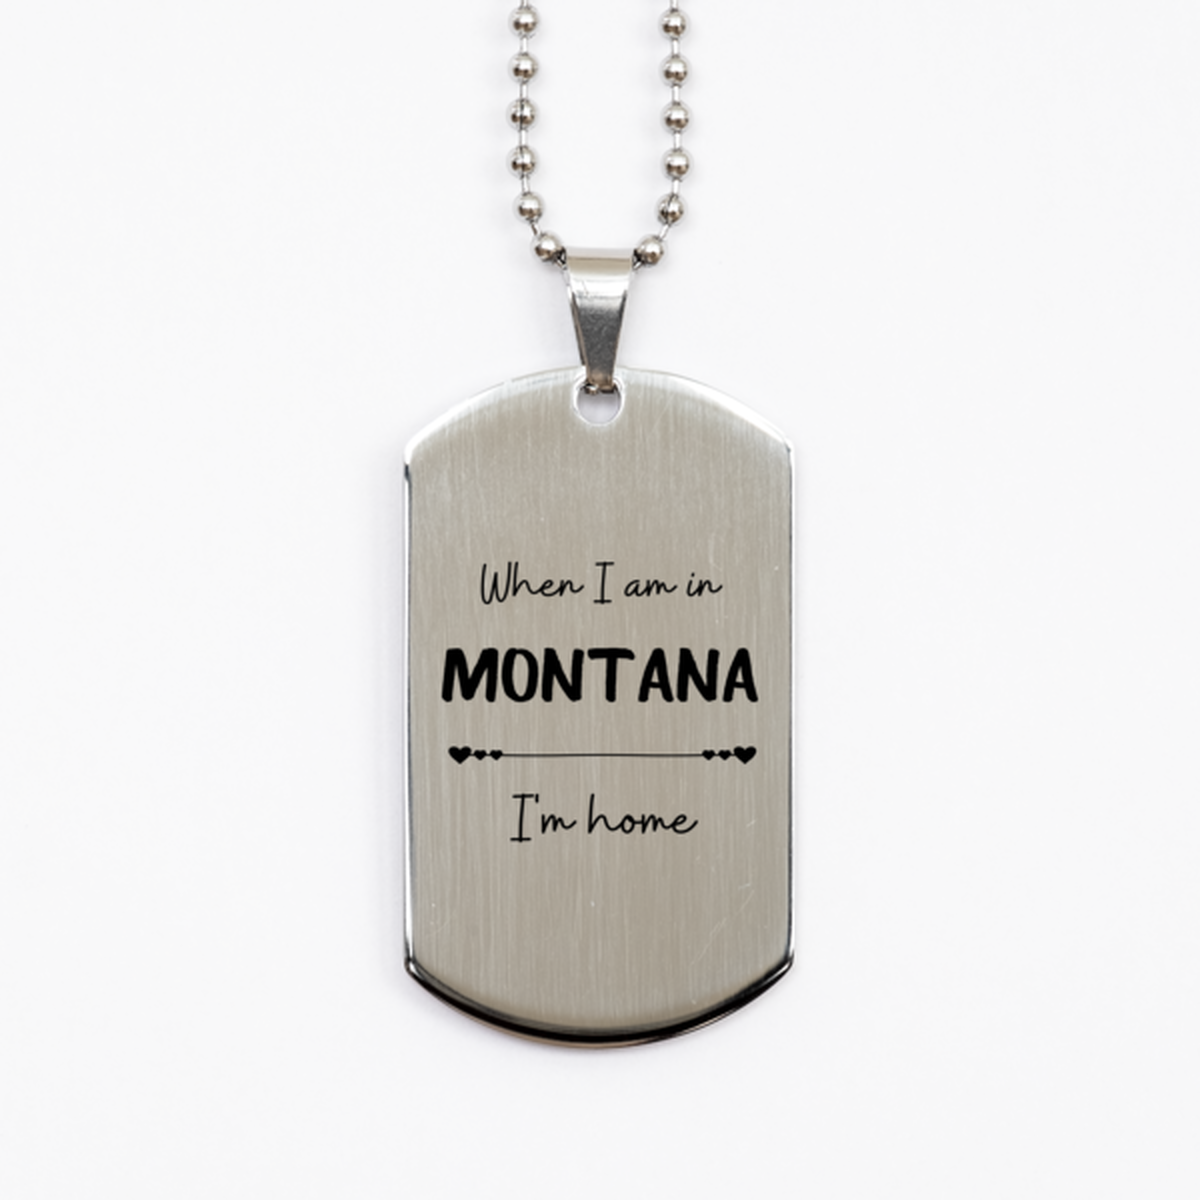 When I am in Montana I'm home Silver Dog Tag, Cheap Gifts For Montana, State Montana Birthday Gifts for Friends Coworker